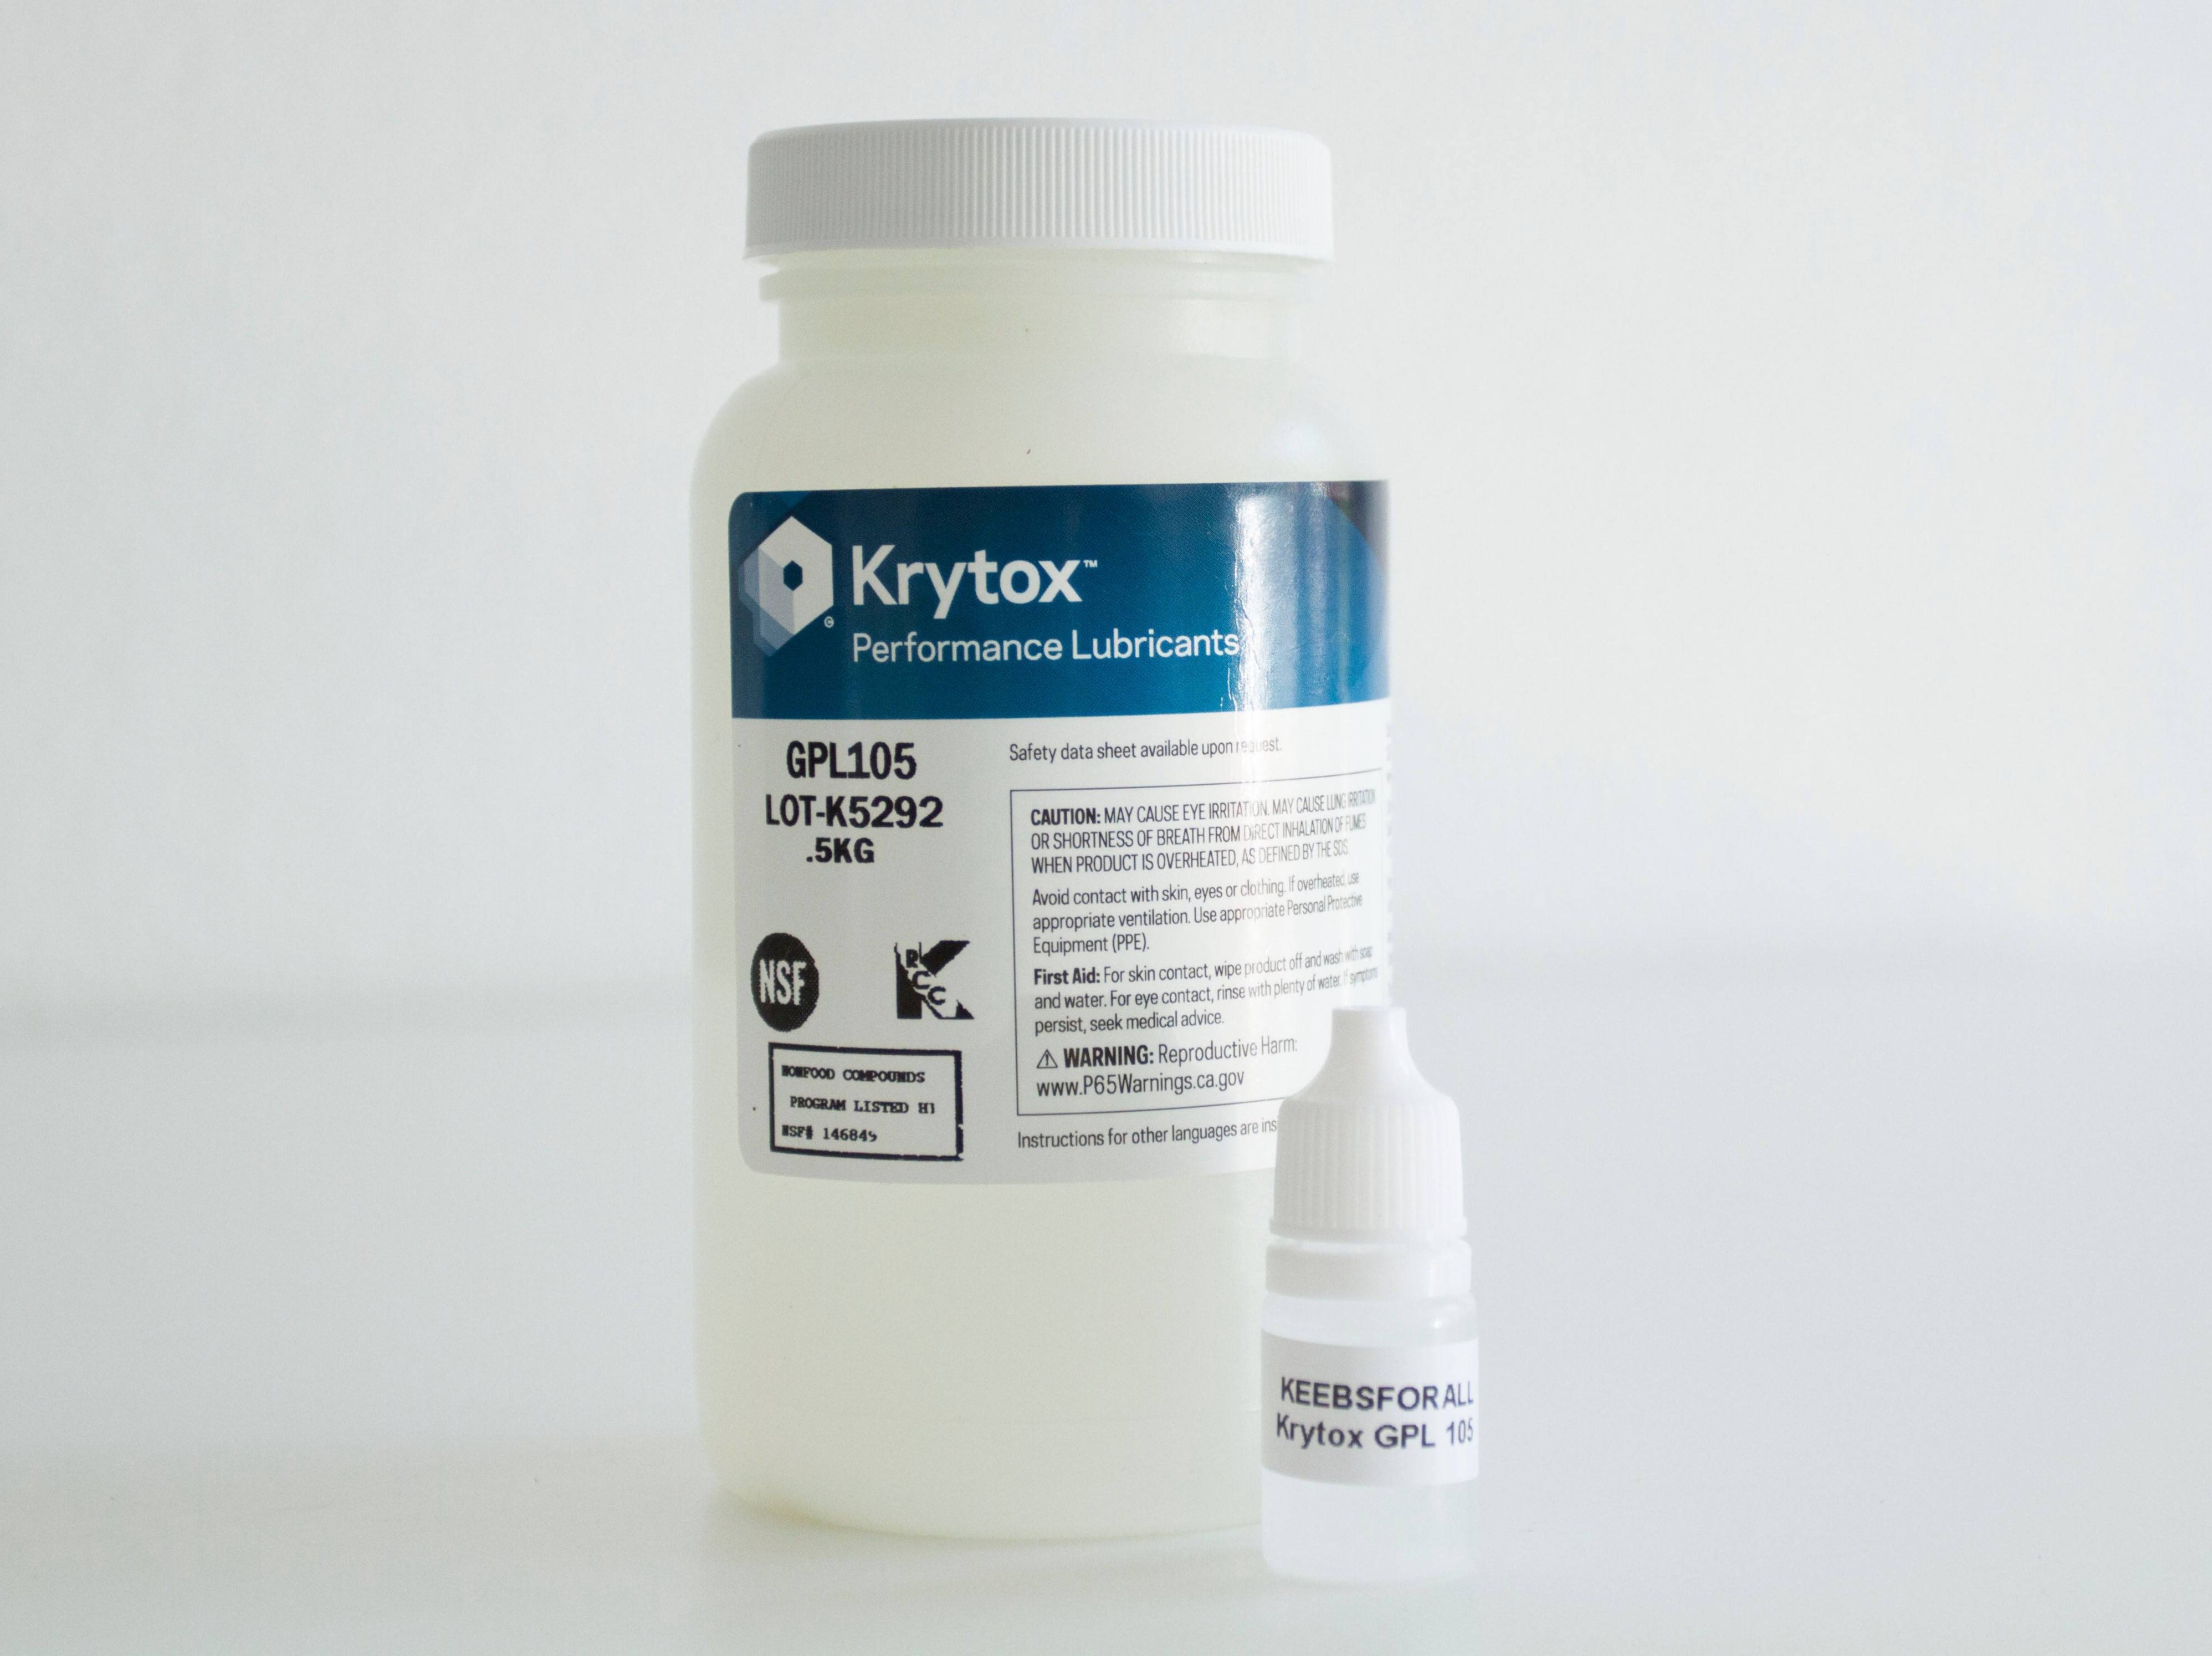 Krytox GPL 105 is an oily lube that is perfect for bag/tub lubing springs.